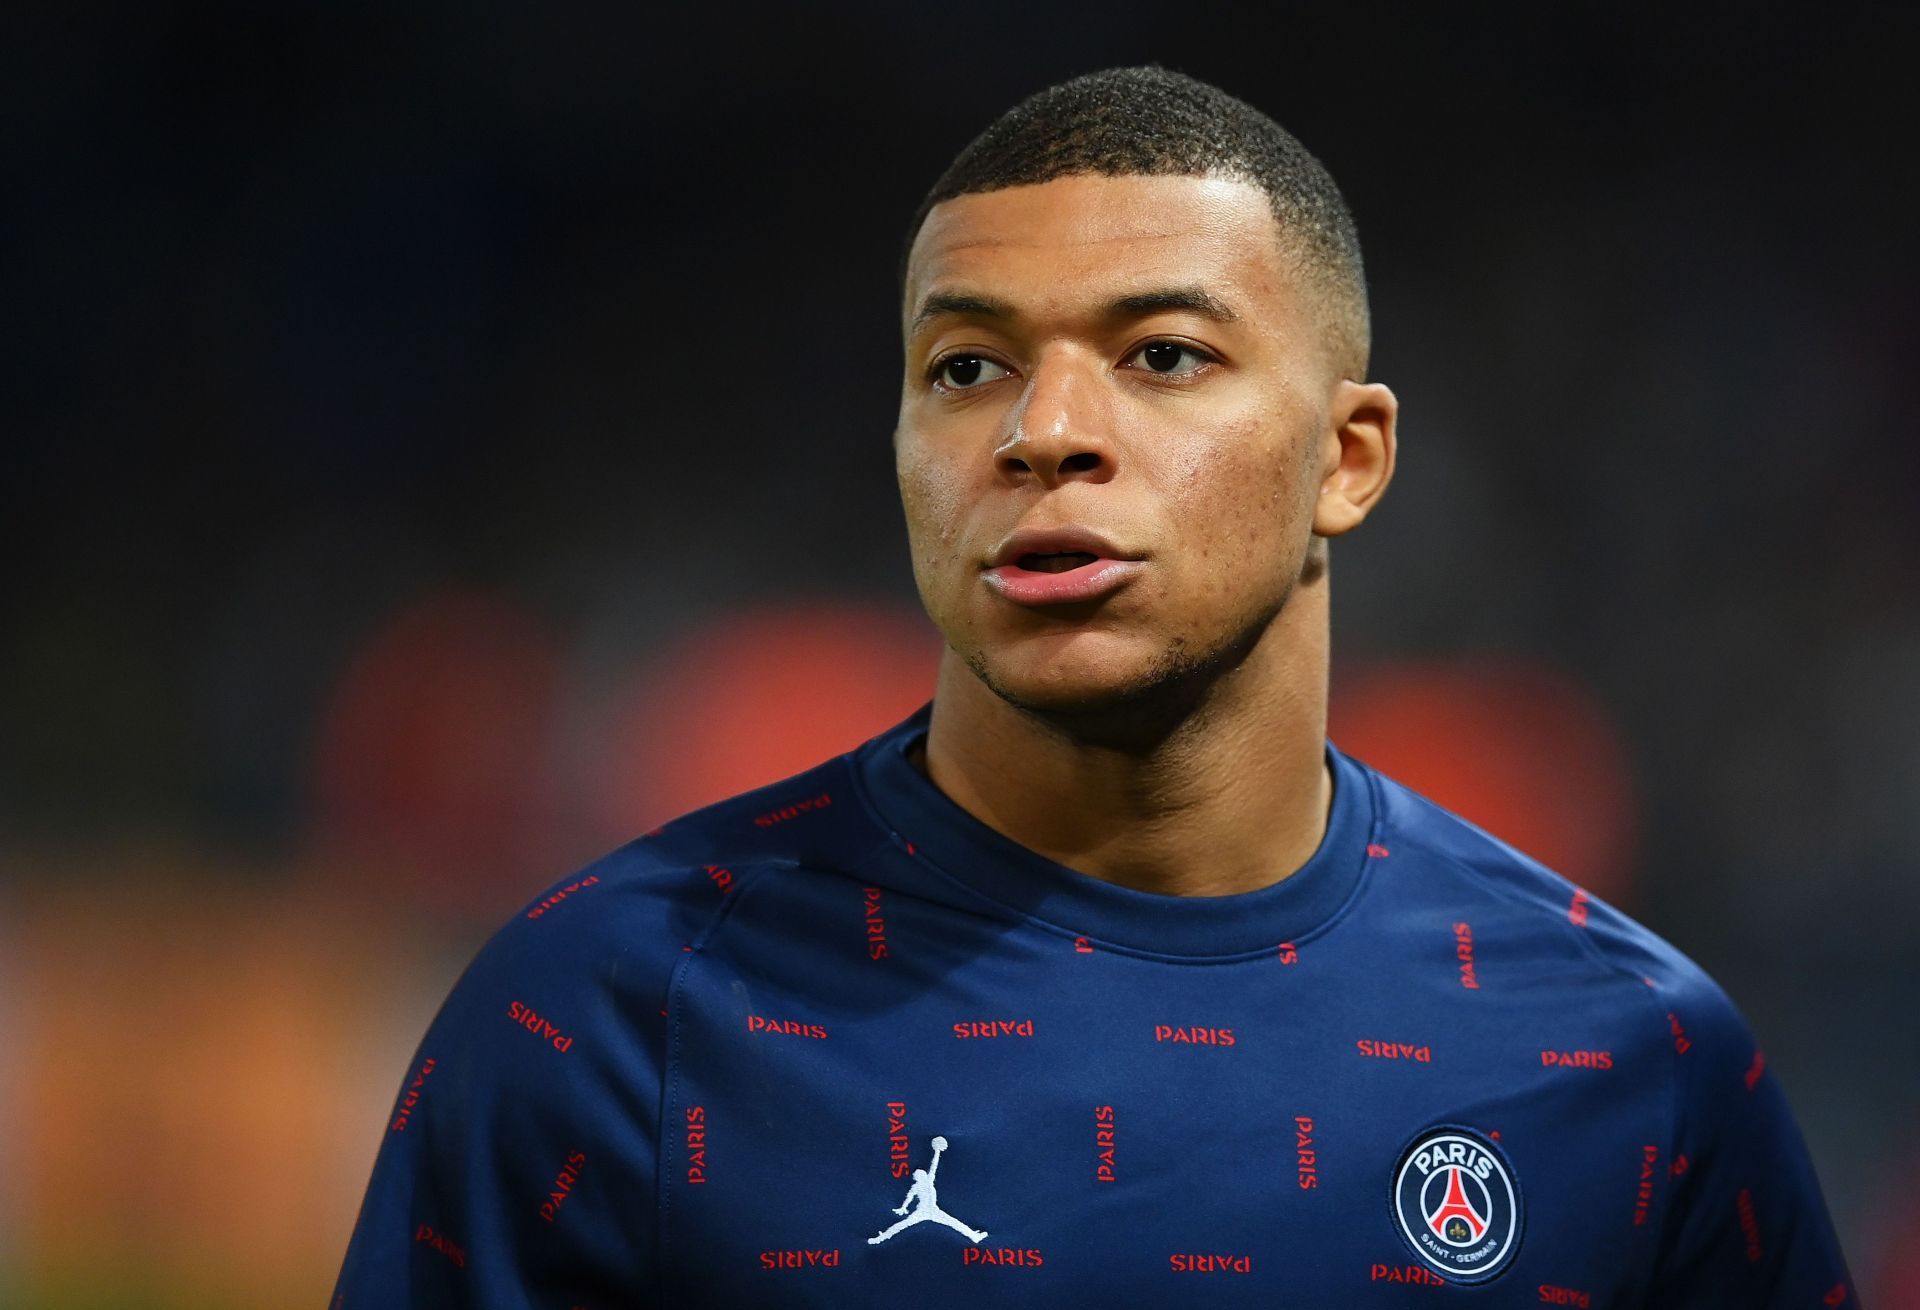 Kylian Mbappe is one of the best attackers in the game at the moment.